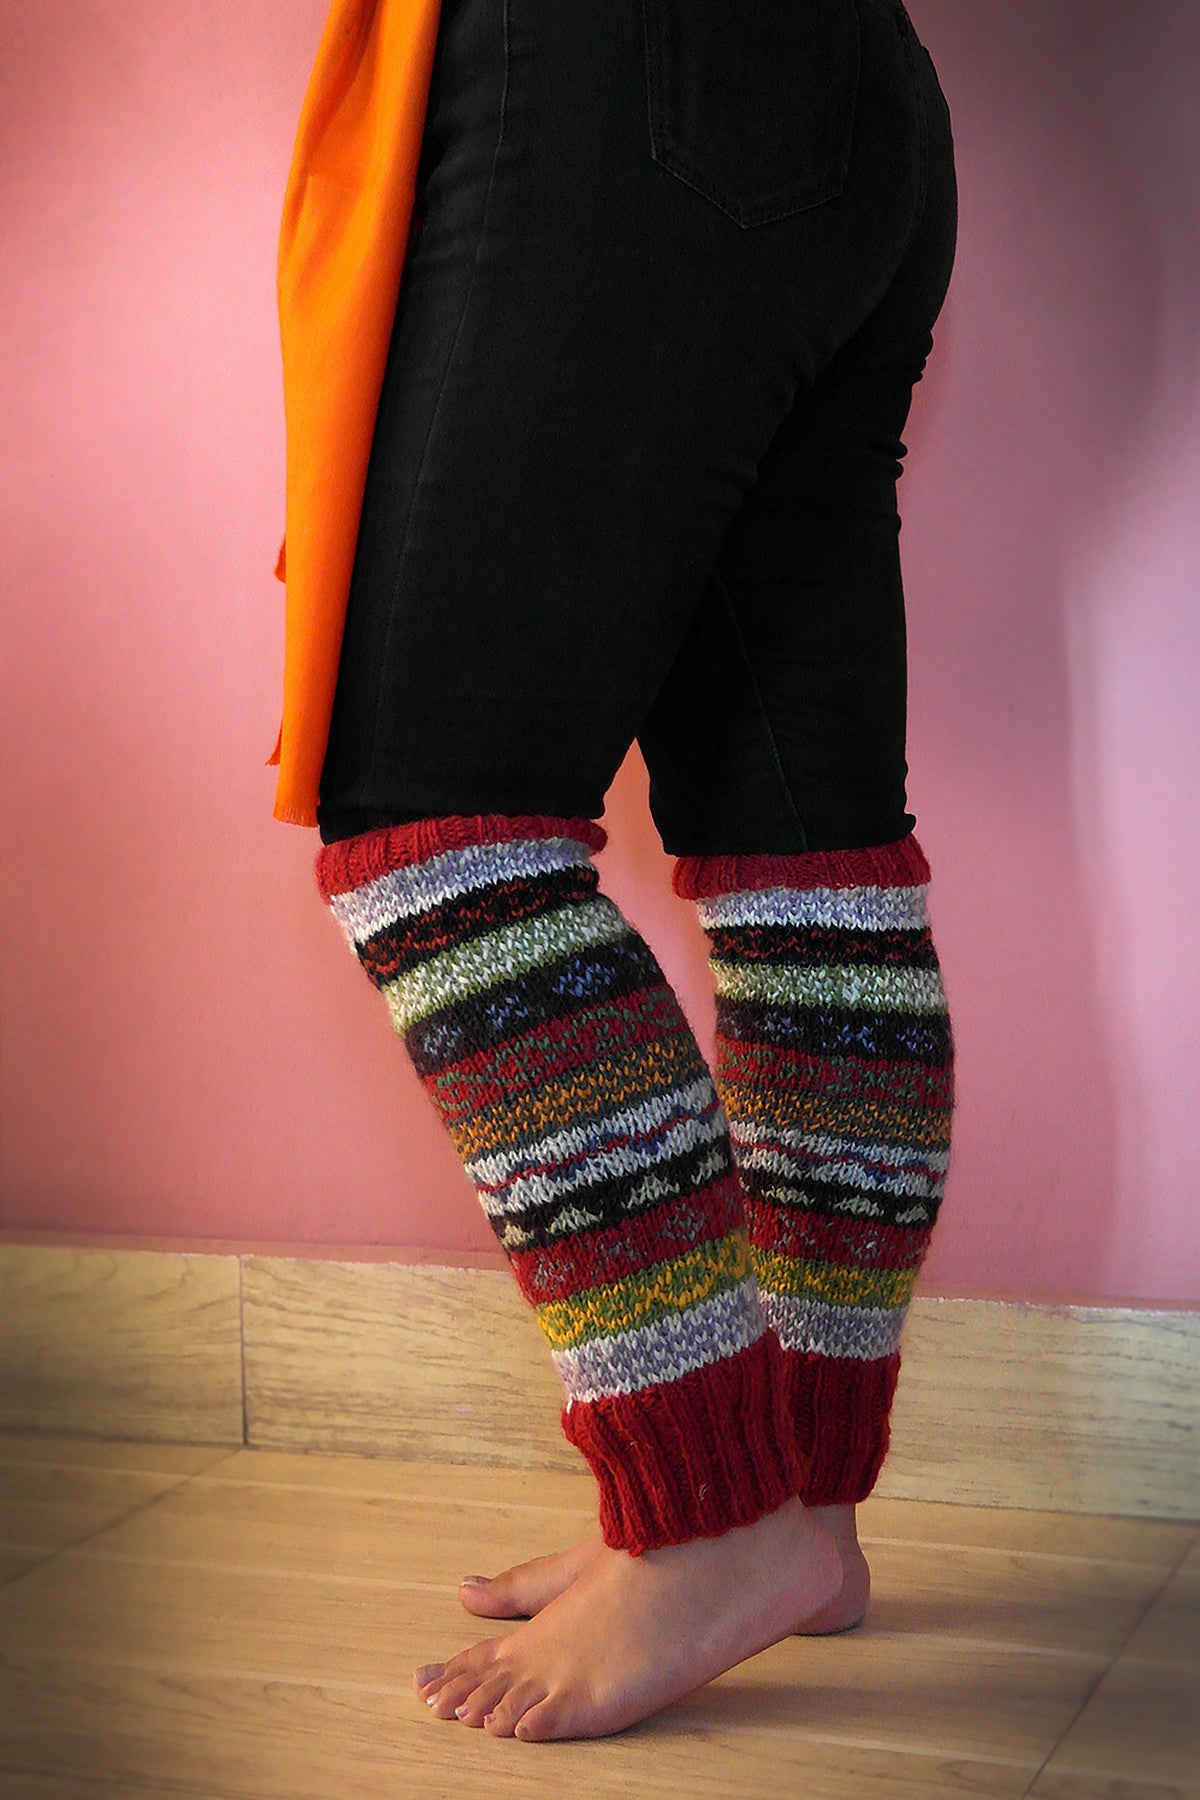 Red Green and mixed colors woolen leg warmers